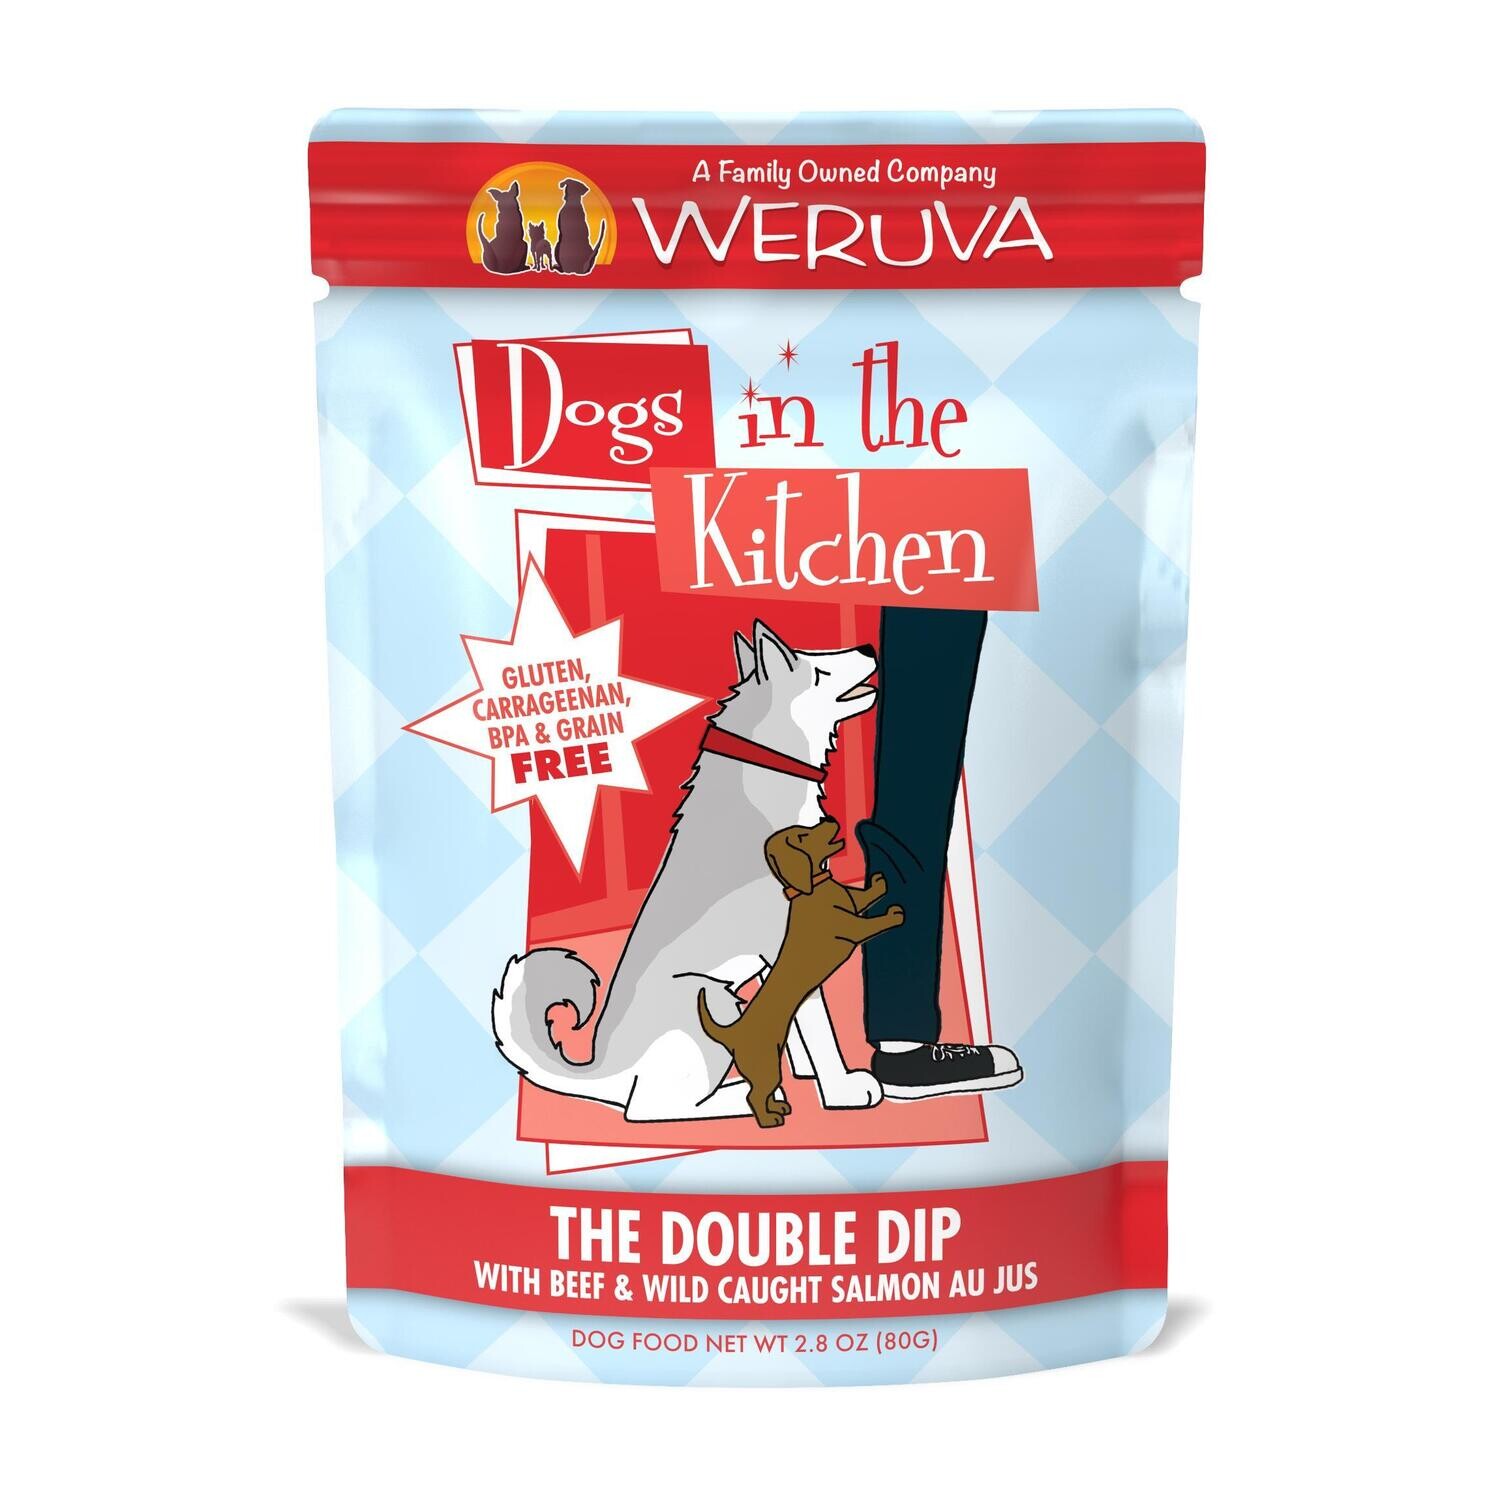 Weruva Dogs in the Kitchen Double Dip pouch 12/case